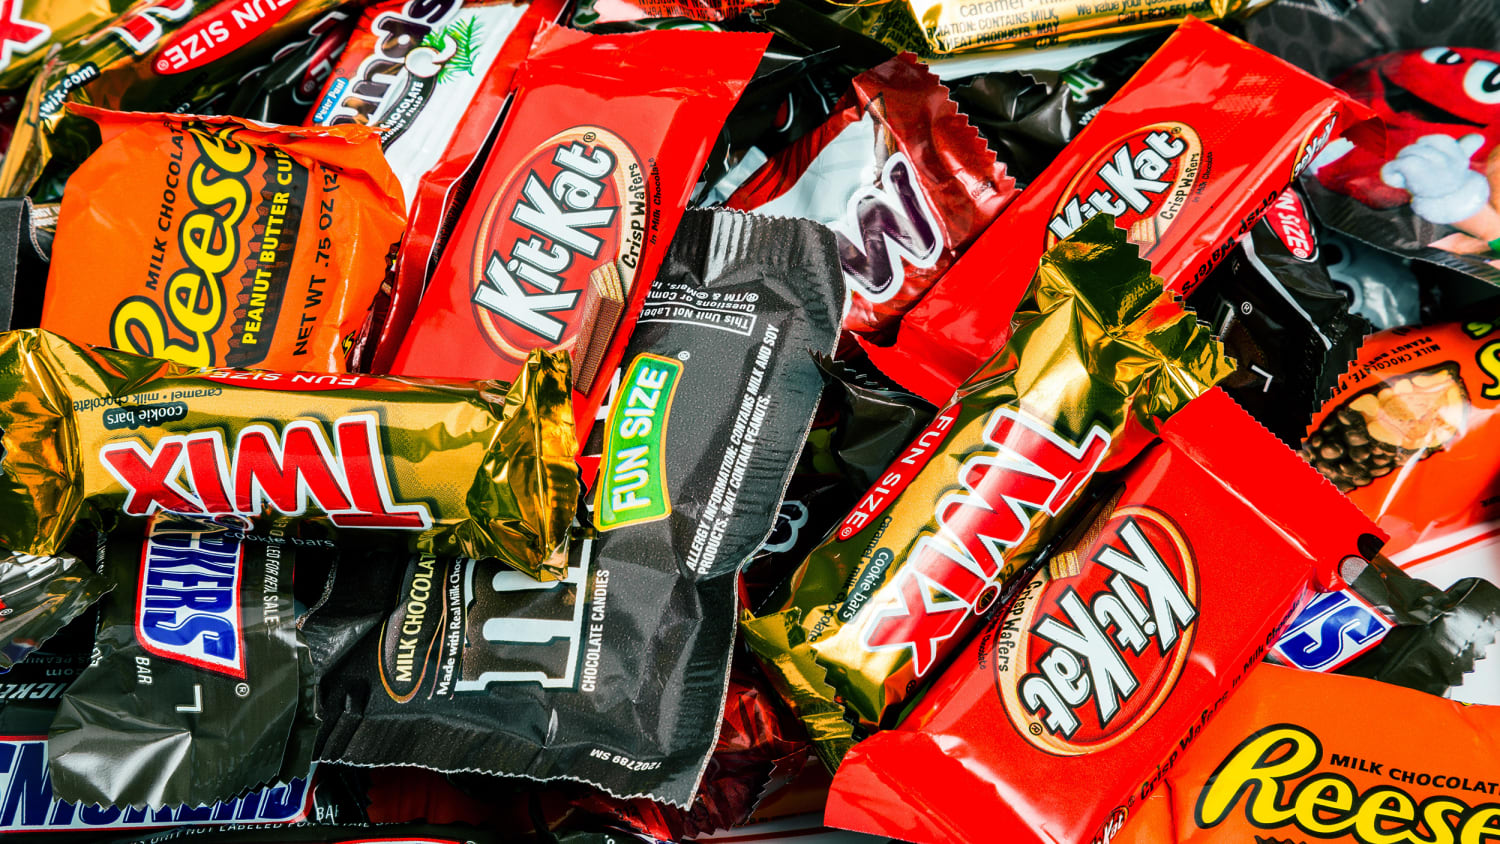 How To Donate Halloween Candy To A Good Cause